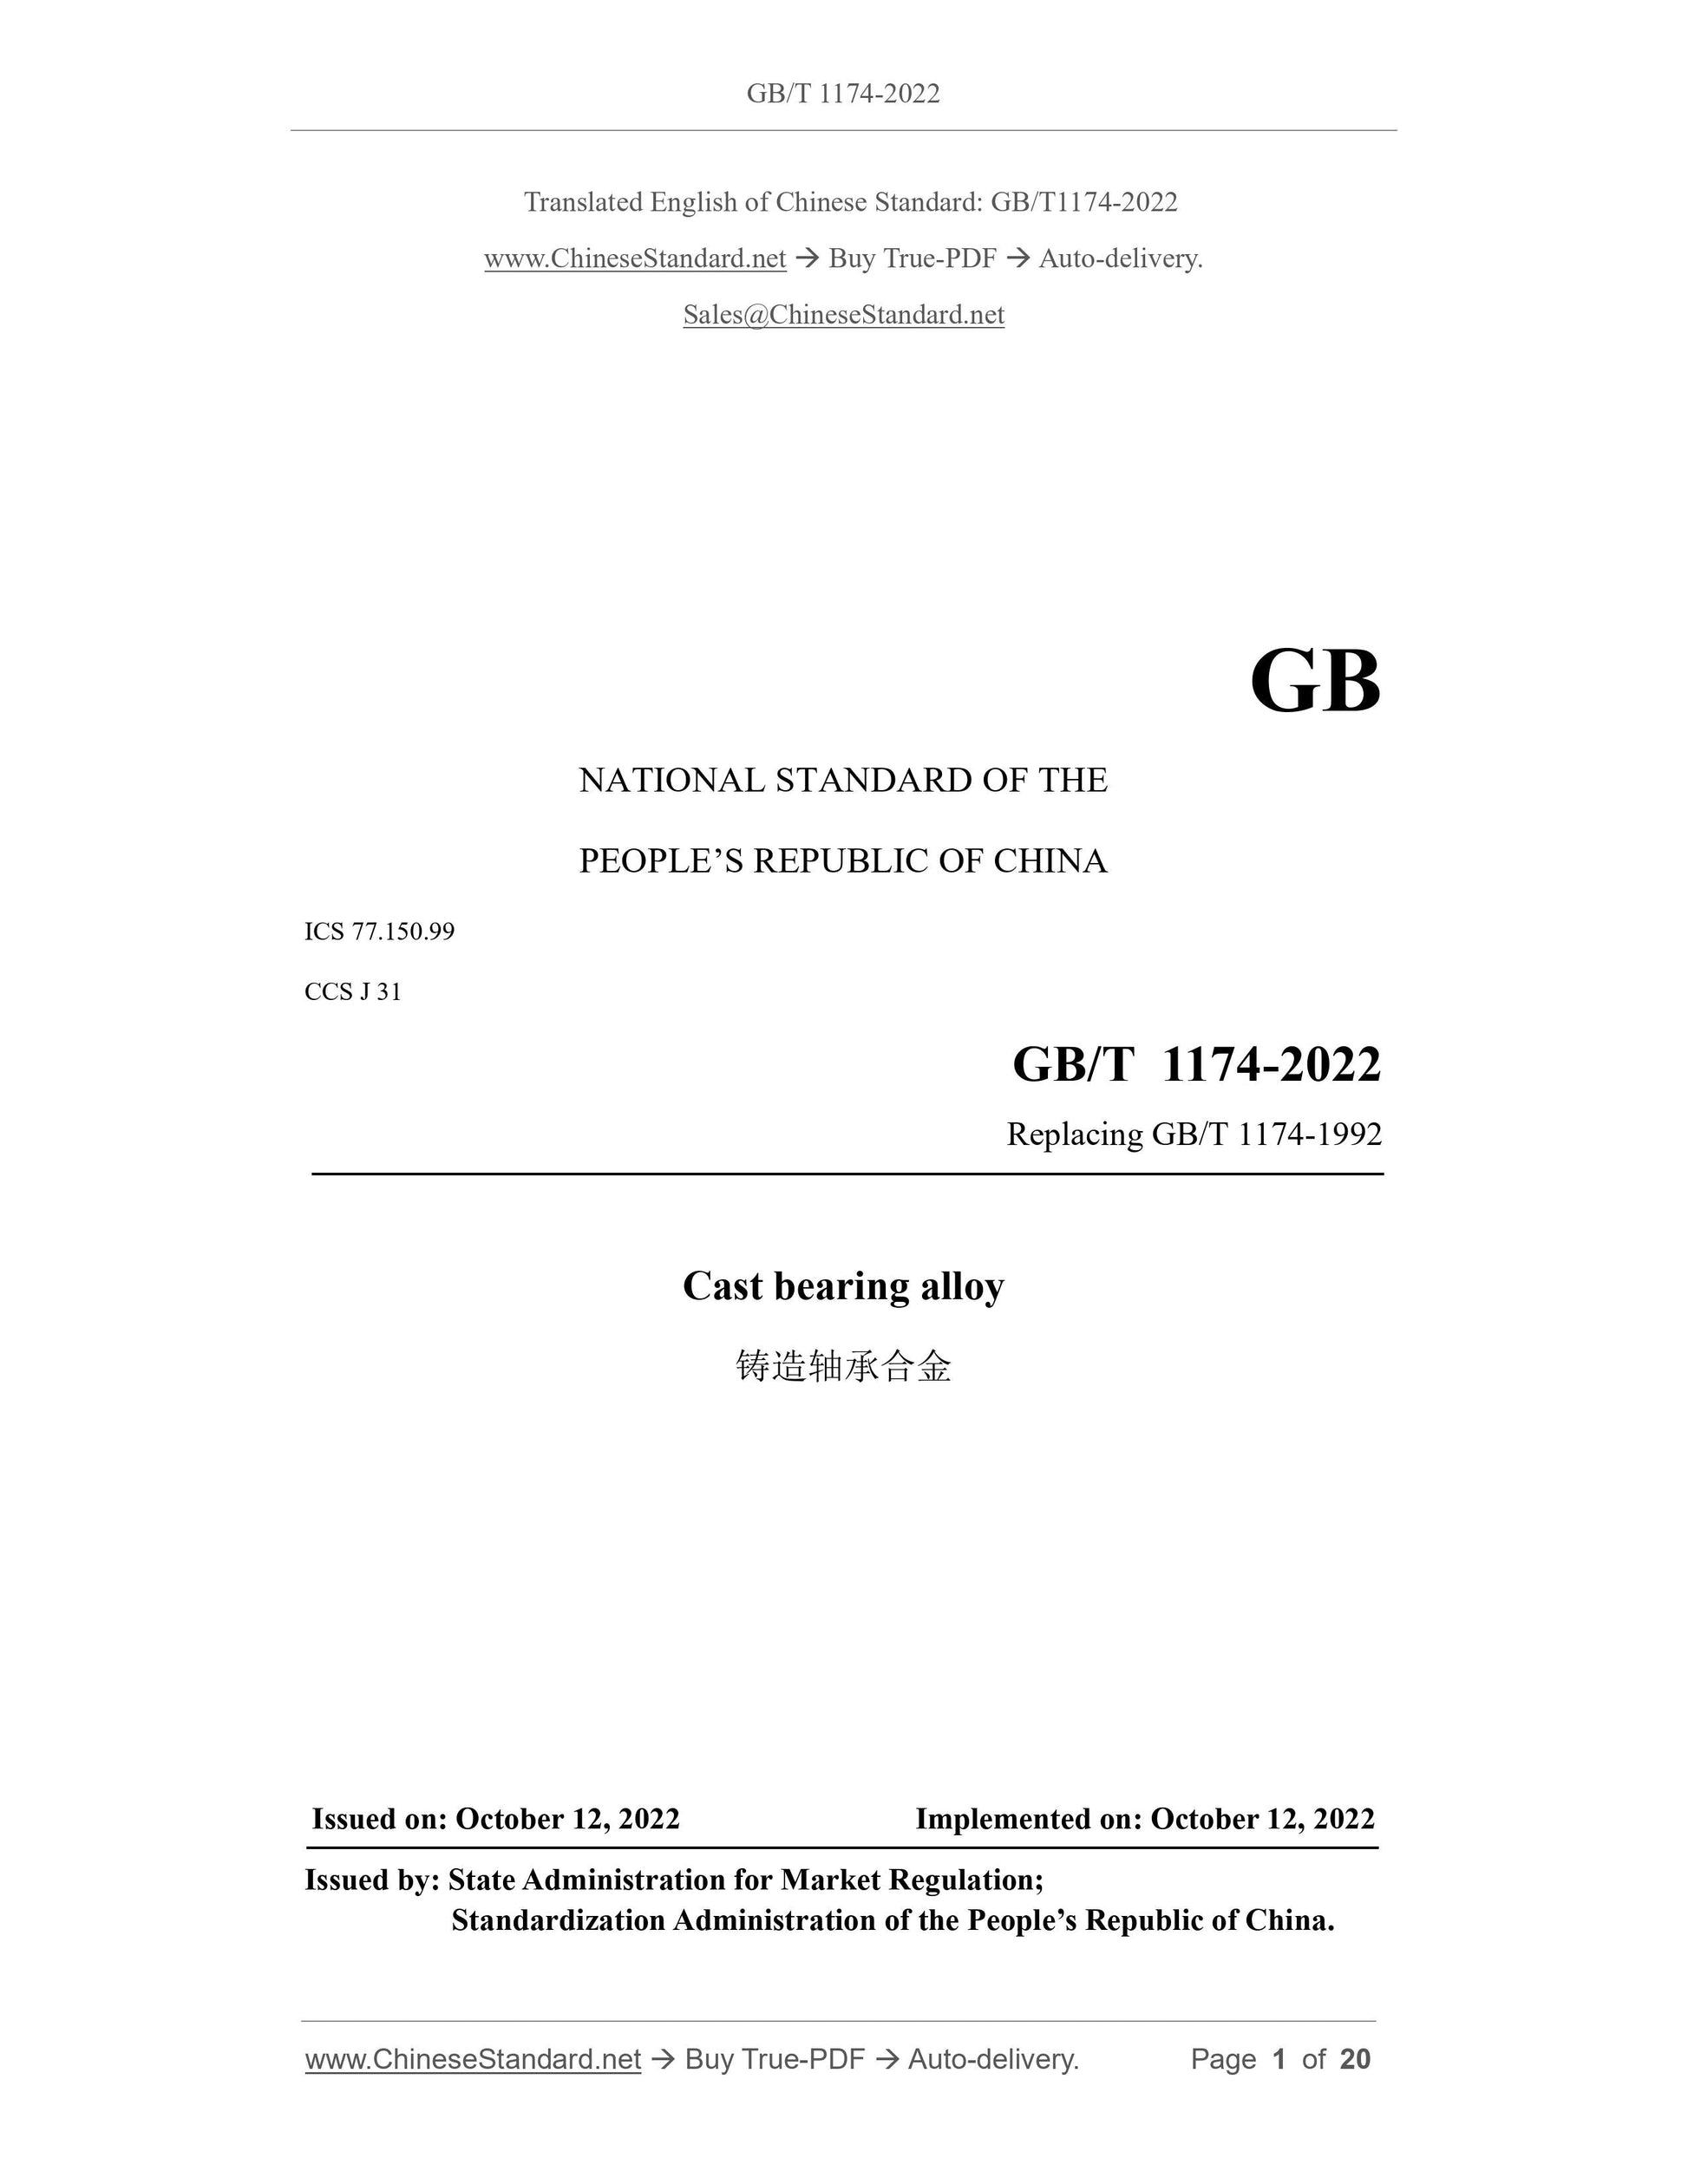 GB/T 1174-2022 Page 1